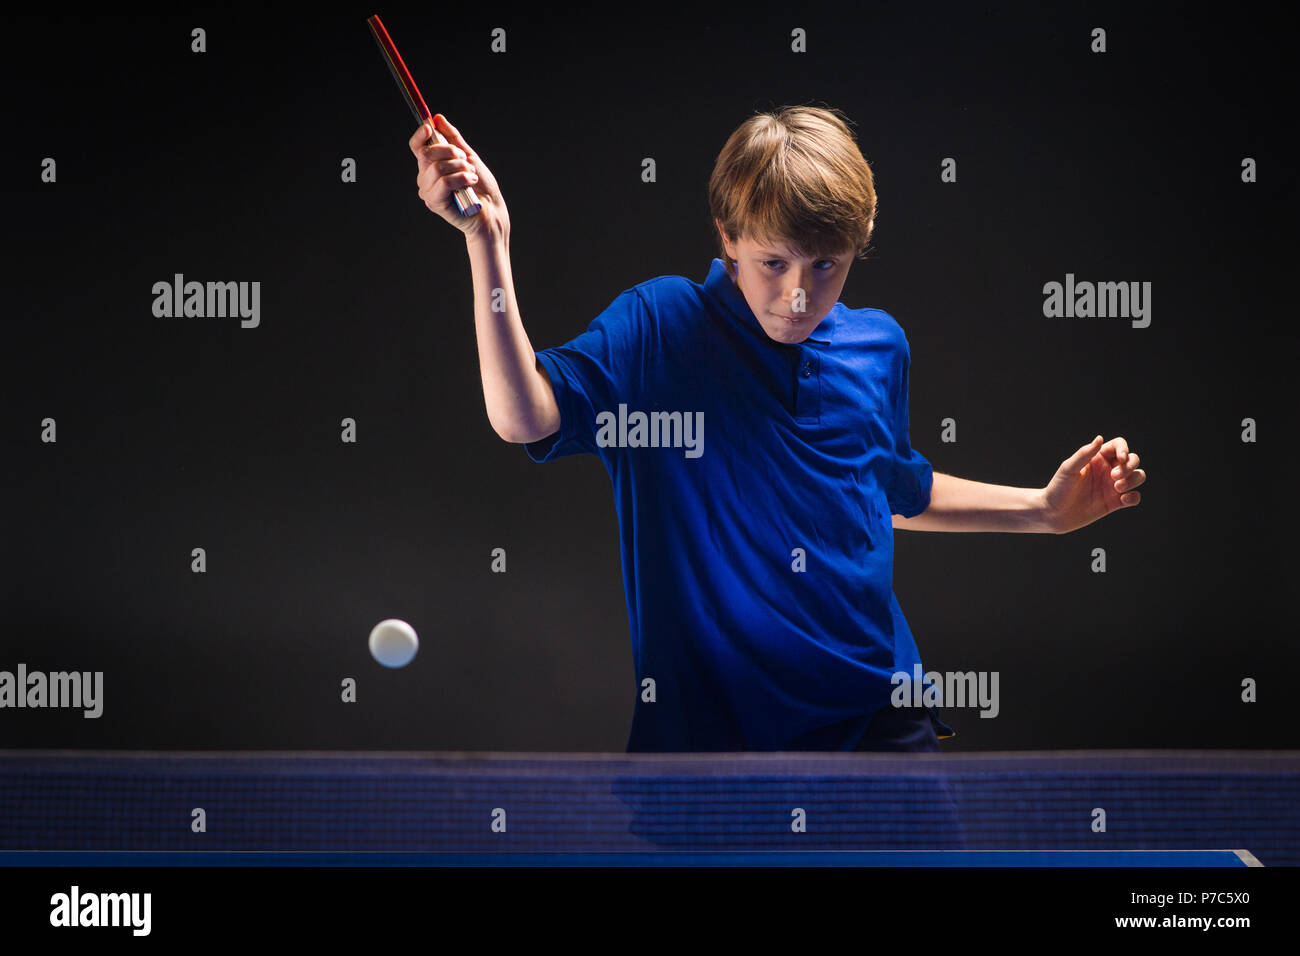 table tennis player in action Stock Photo